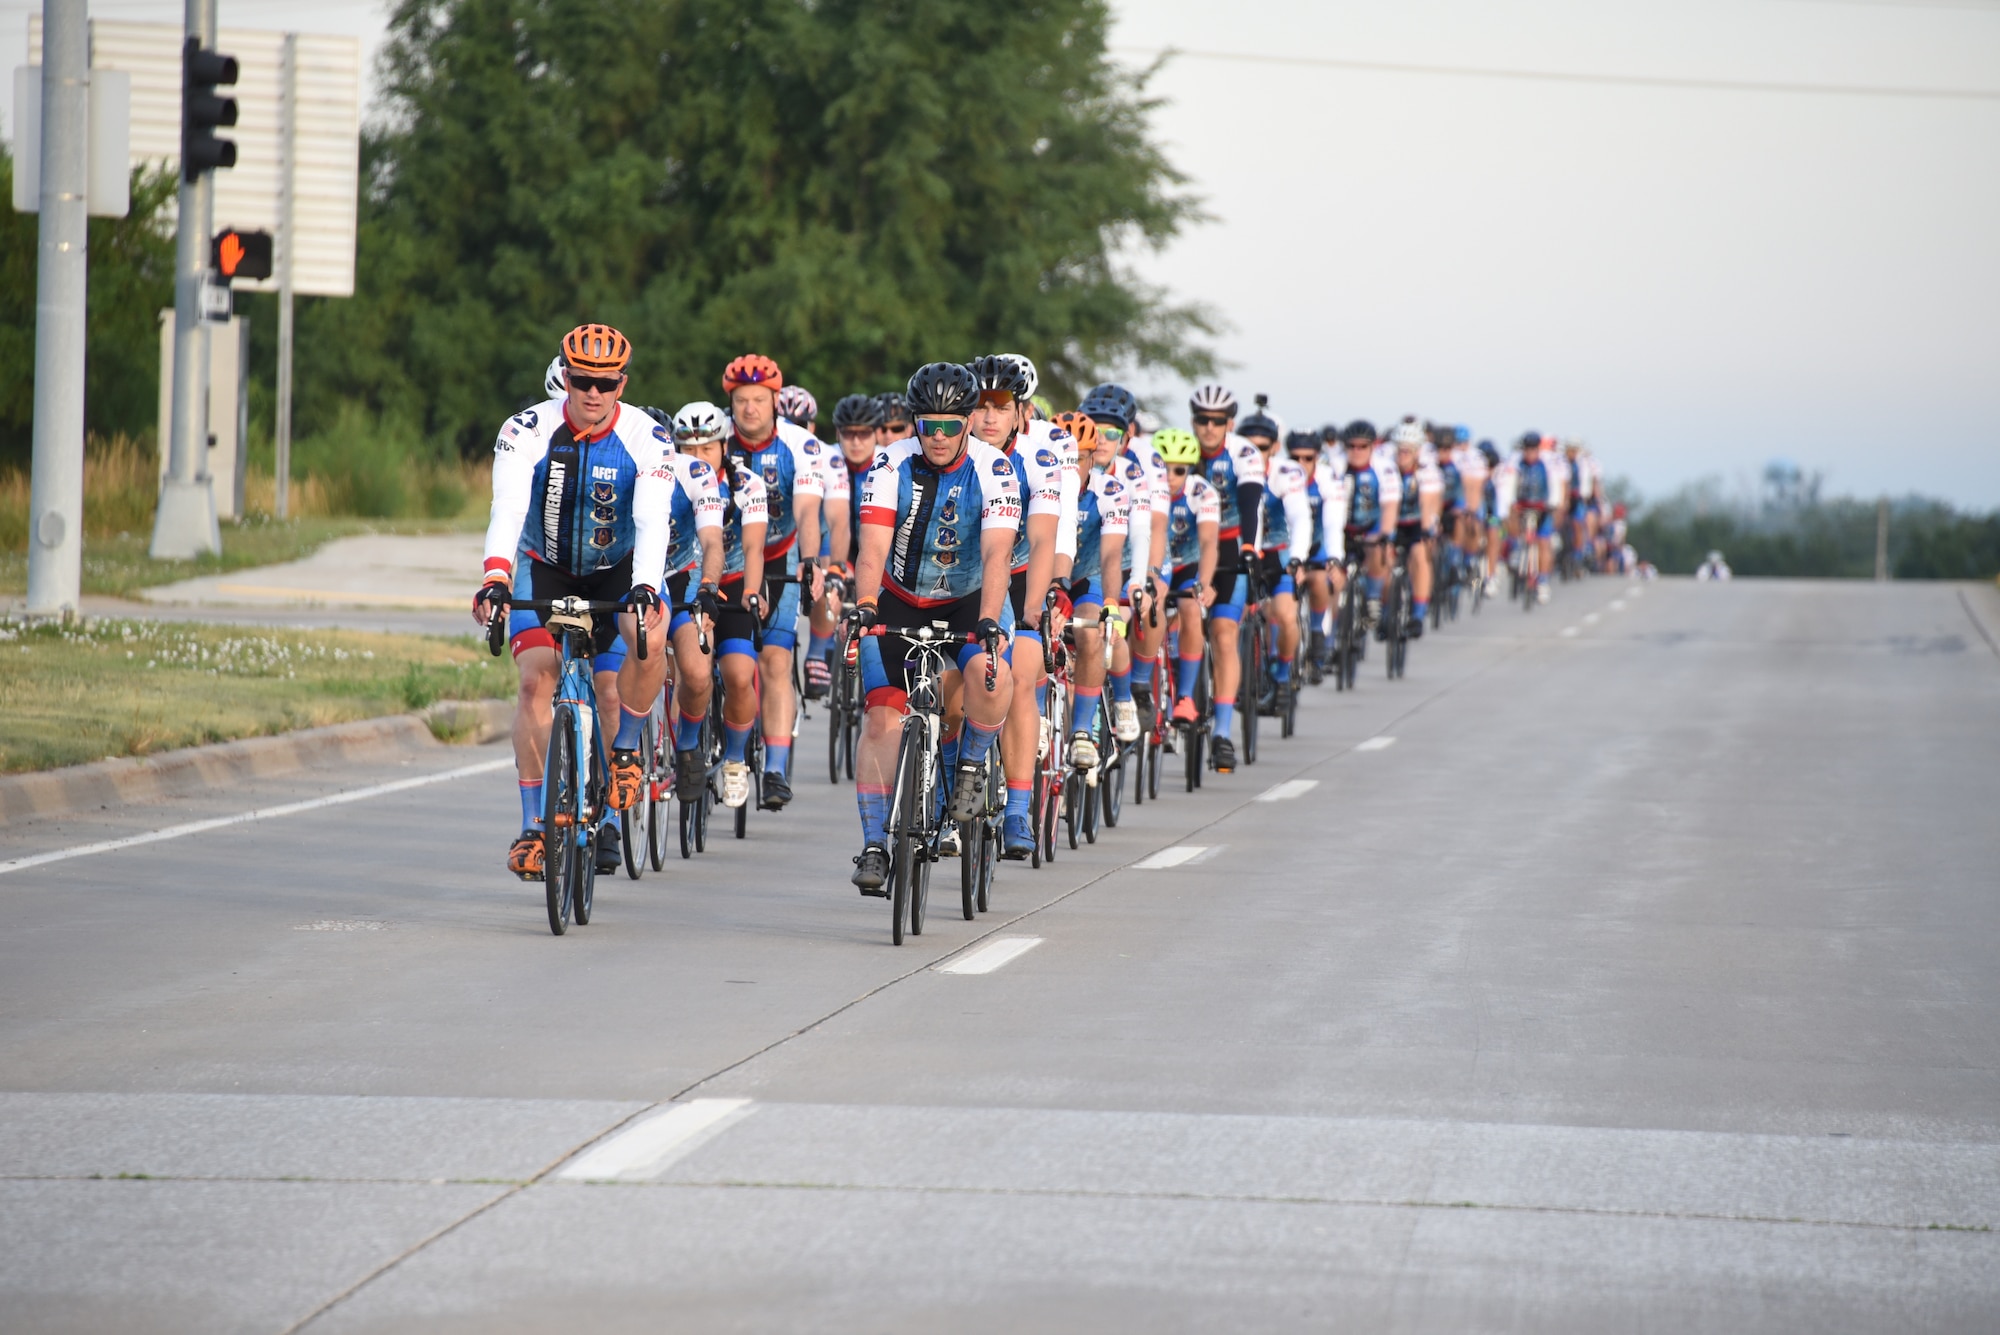 AFCT members ride two-by-two down a road